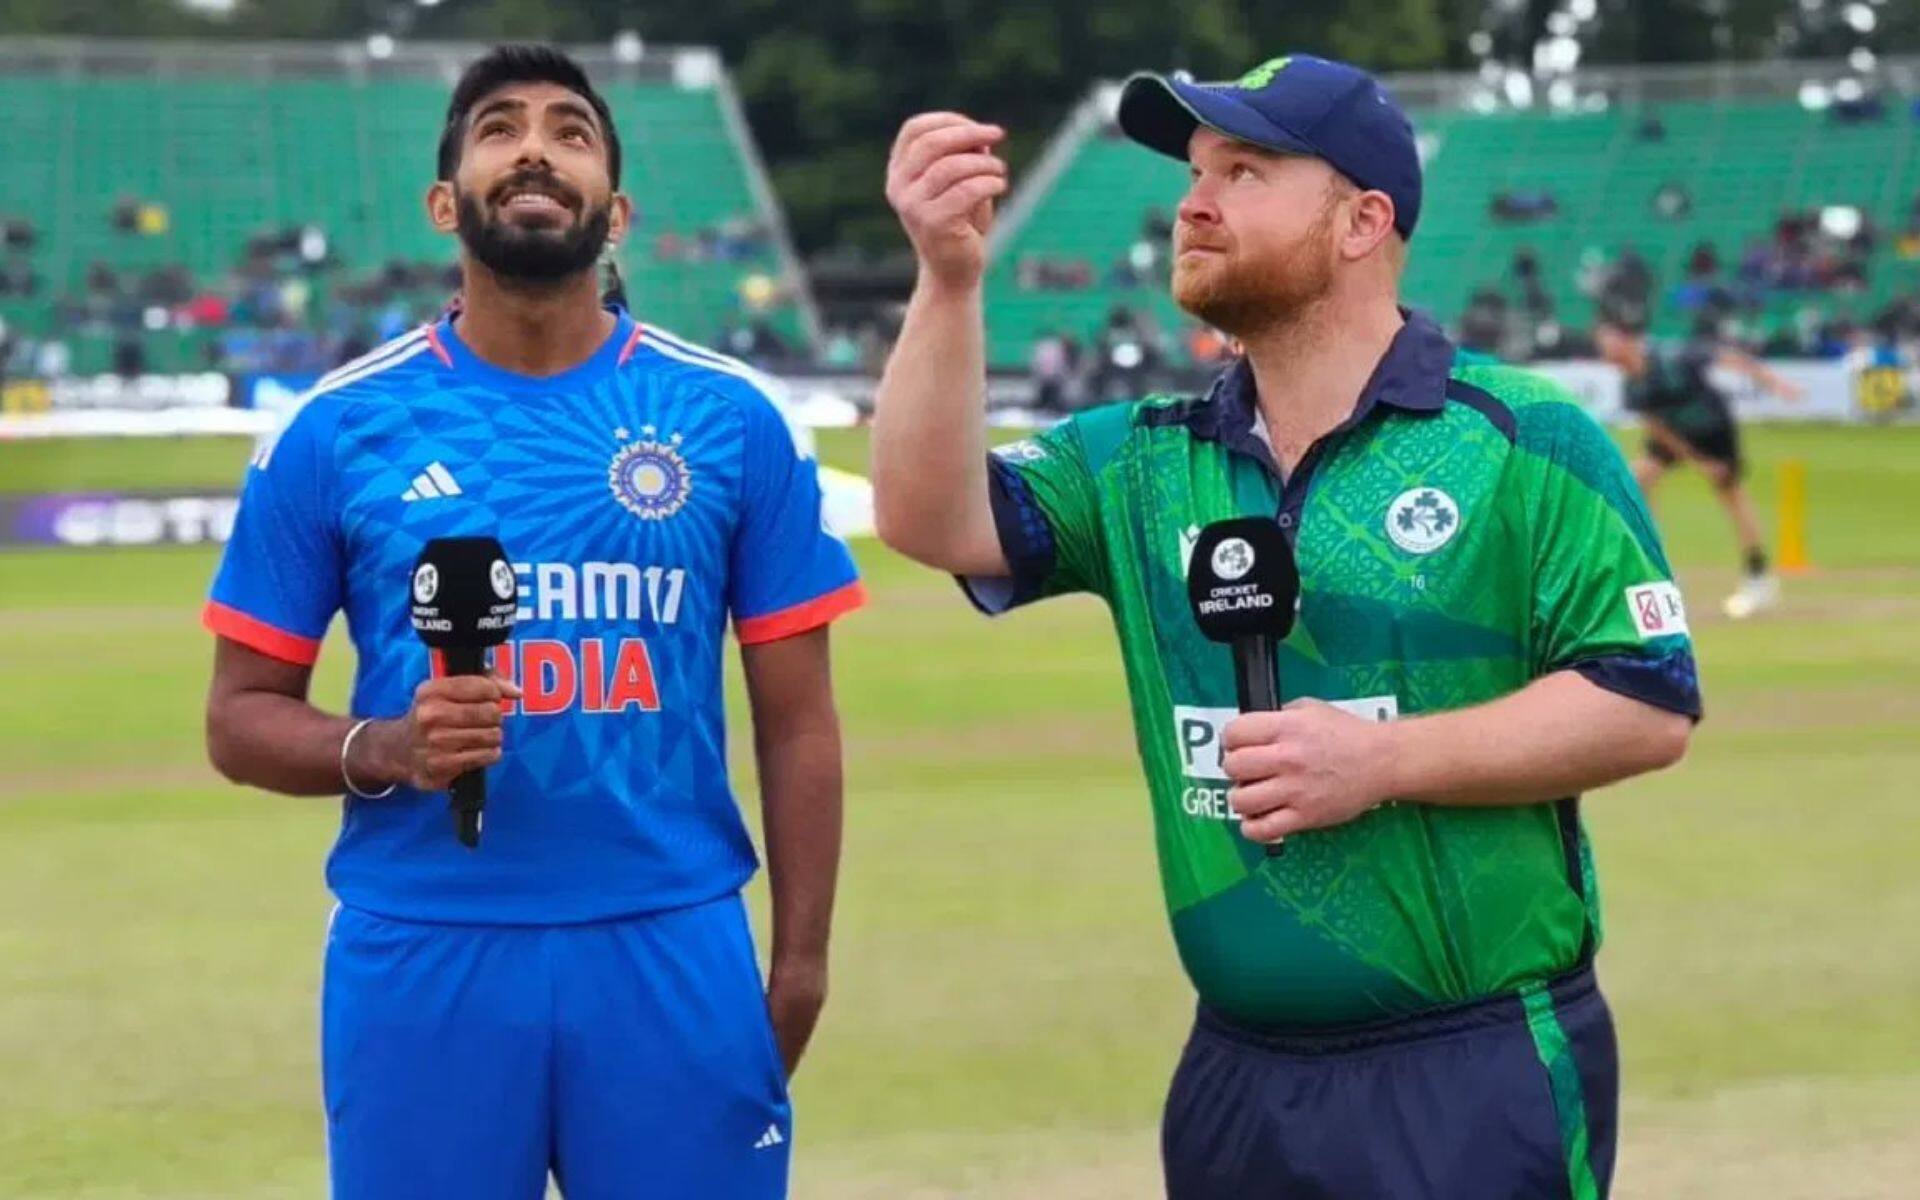 IND to face IRE tomorrow in T20 World Cup Group-A fixture (X.com)